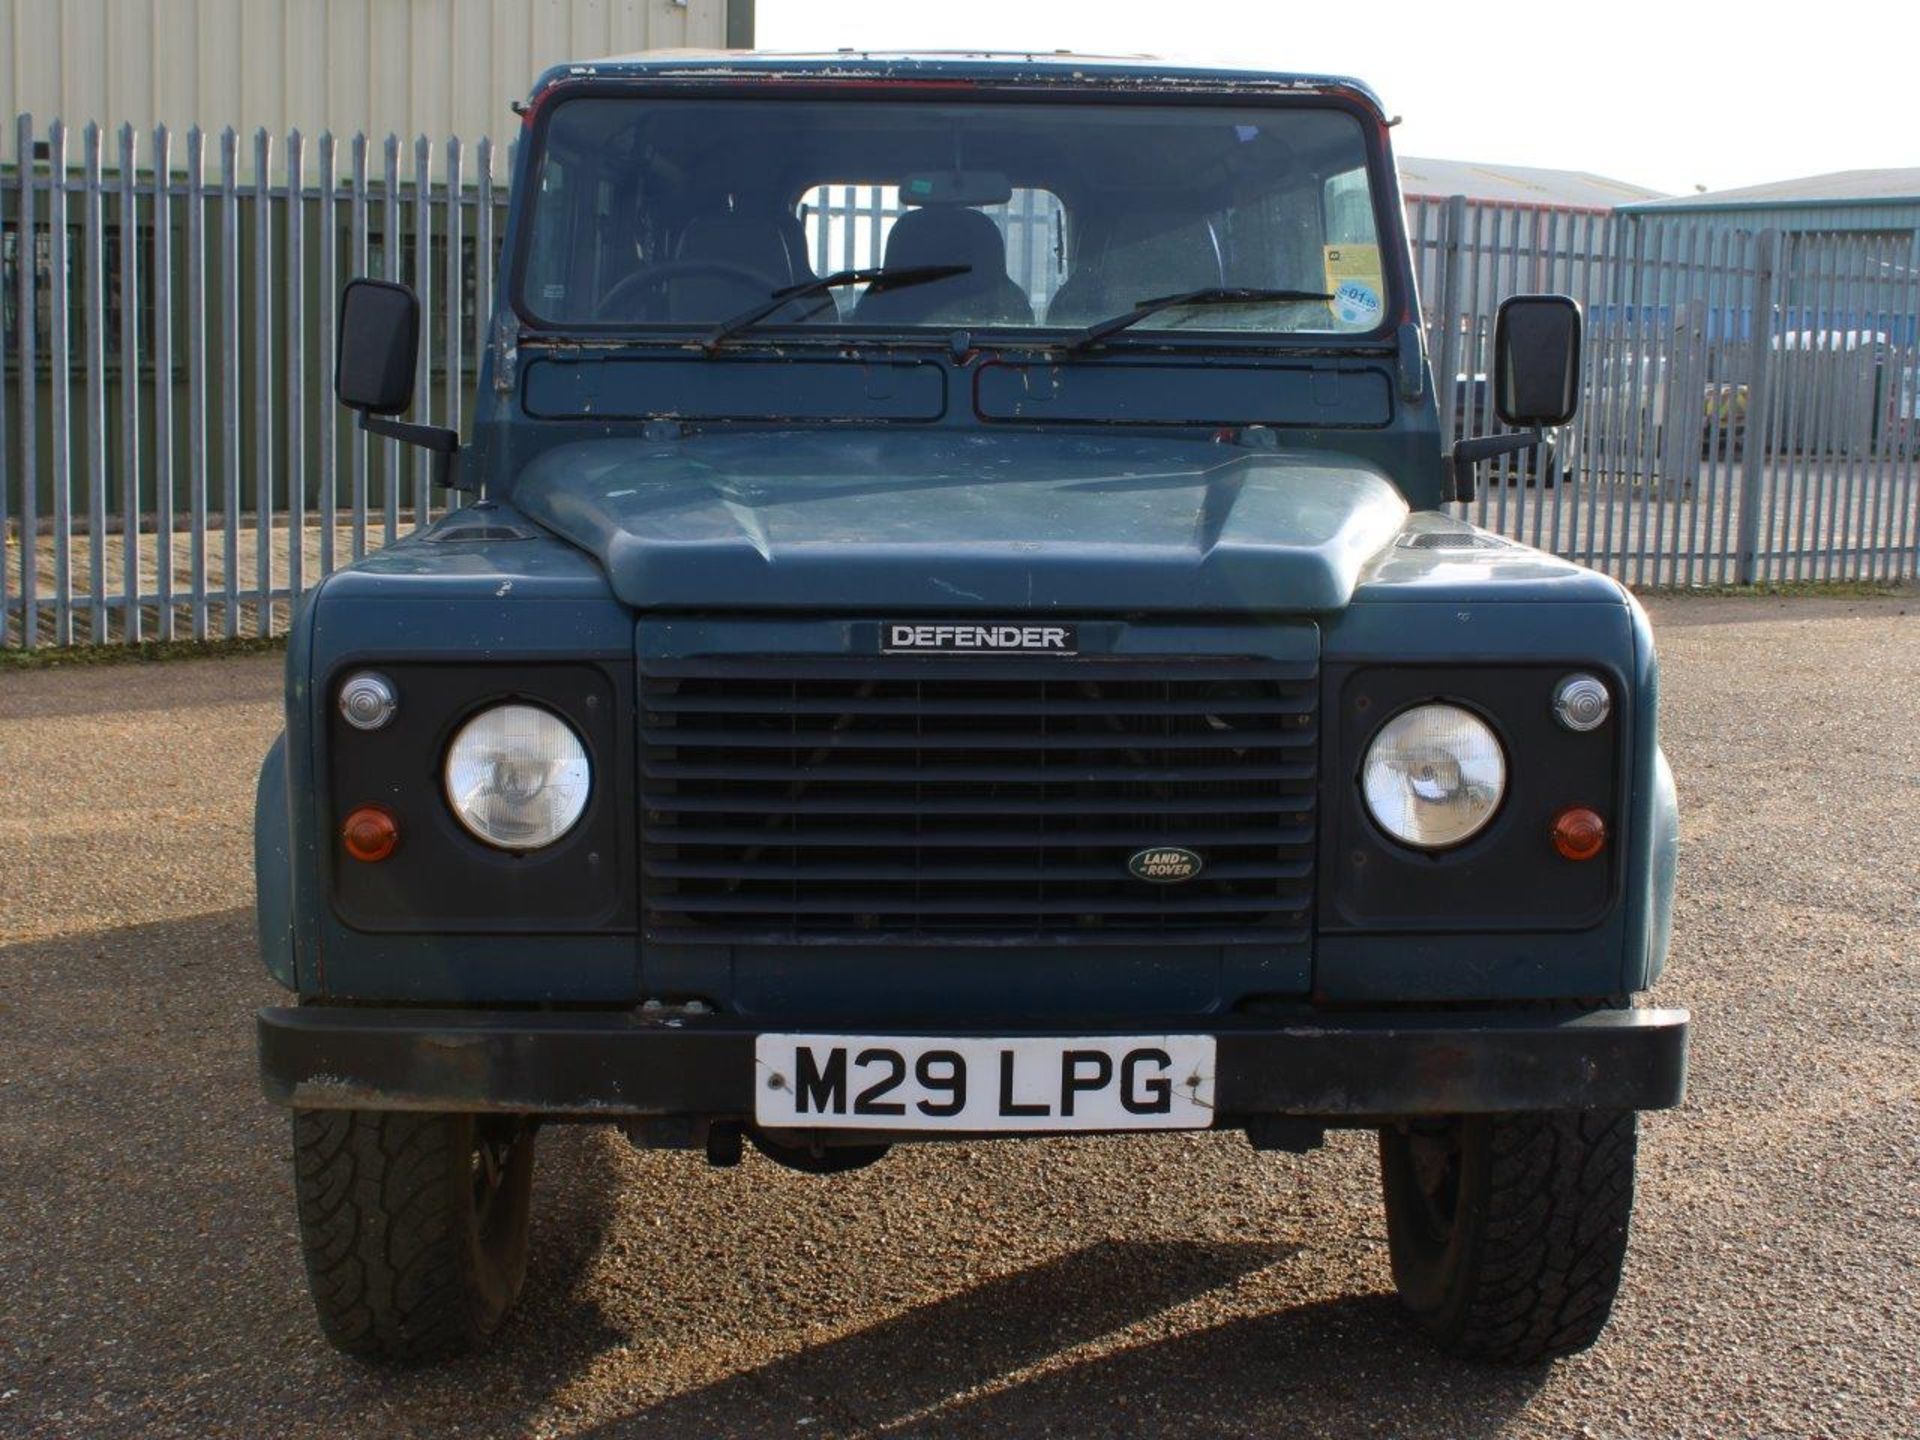 1995 Land Rover Defender 110 County Station Wagon TDi - Image 2 of 29